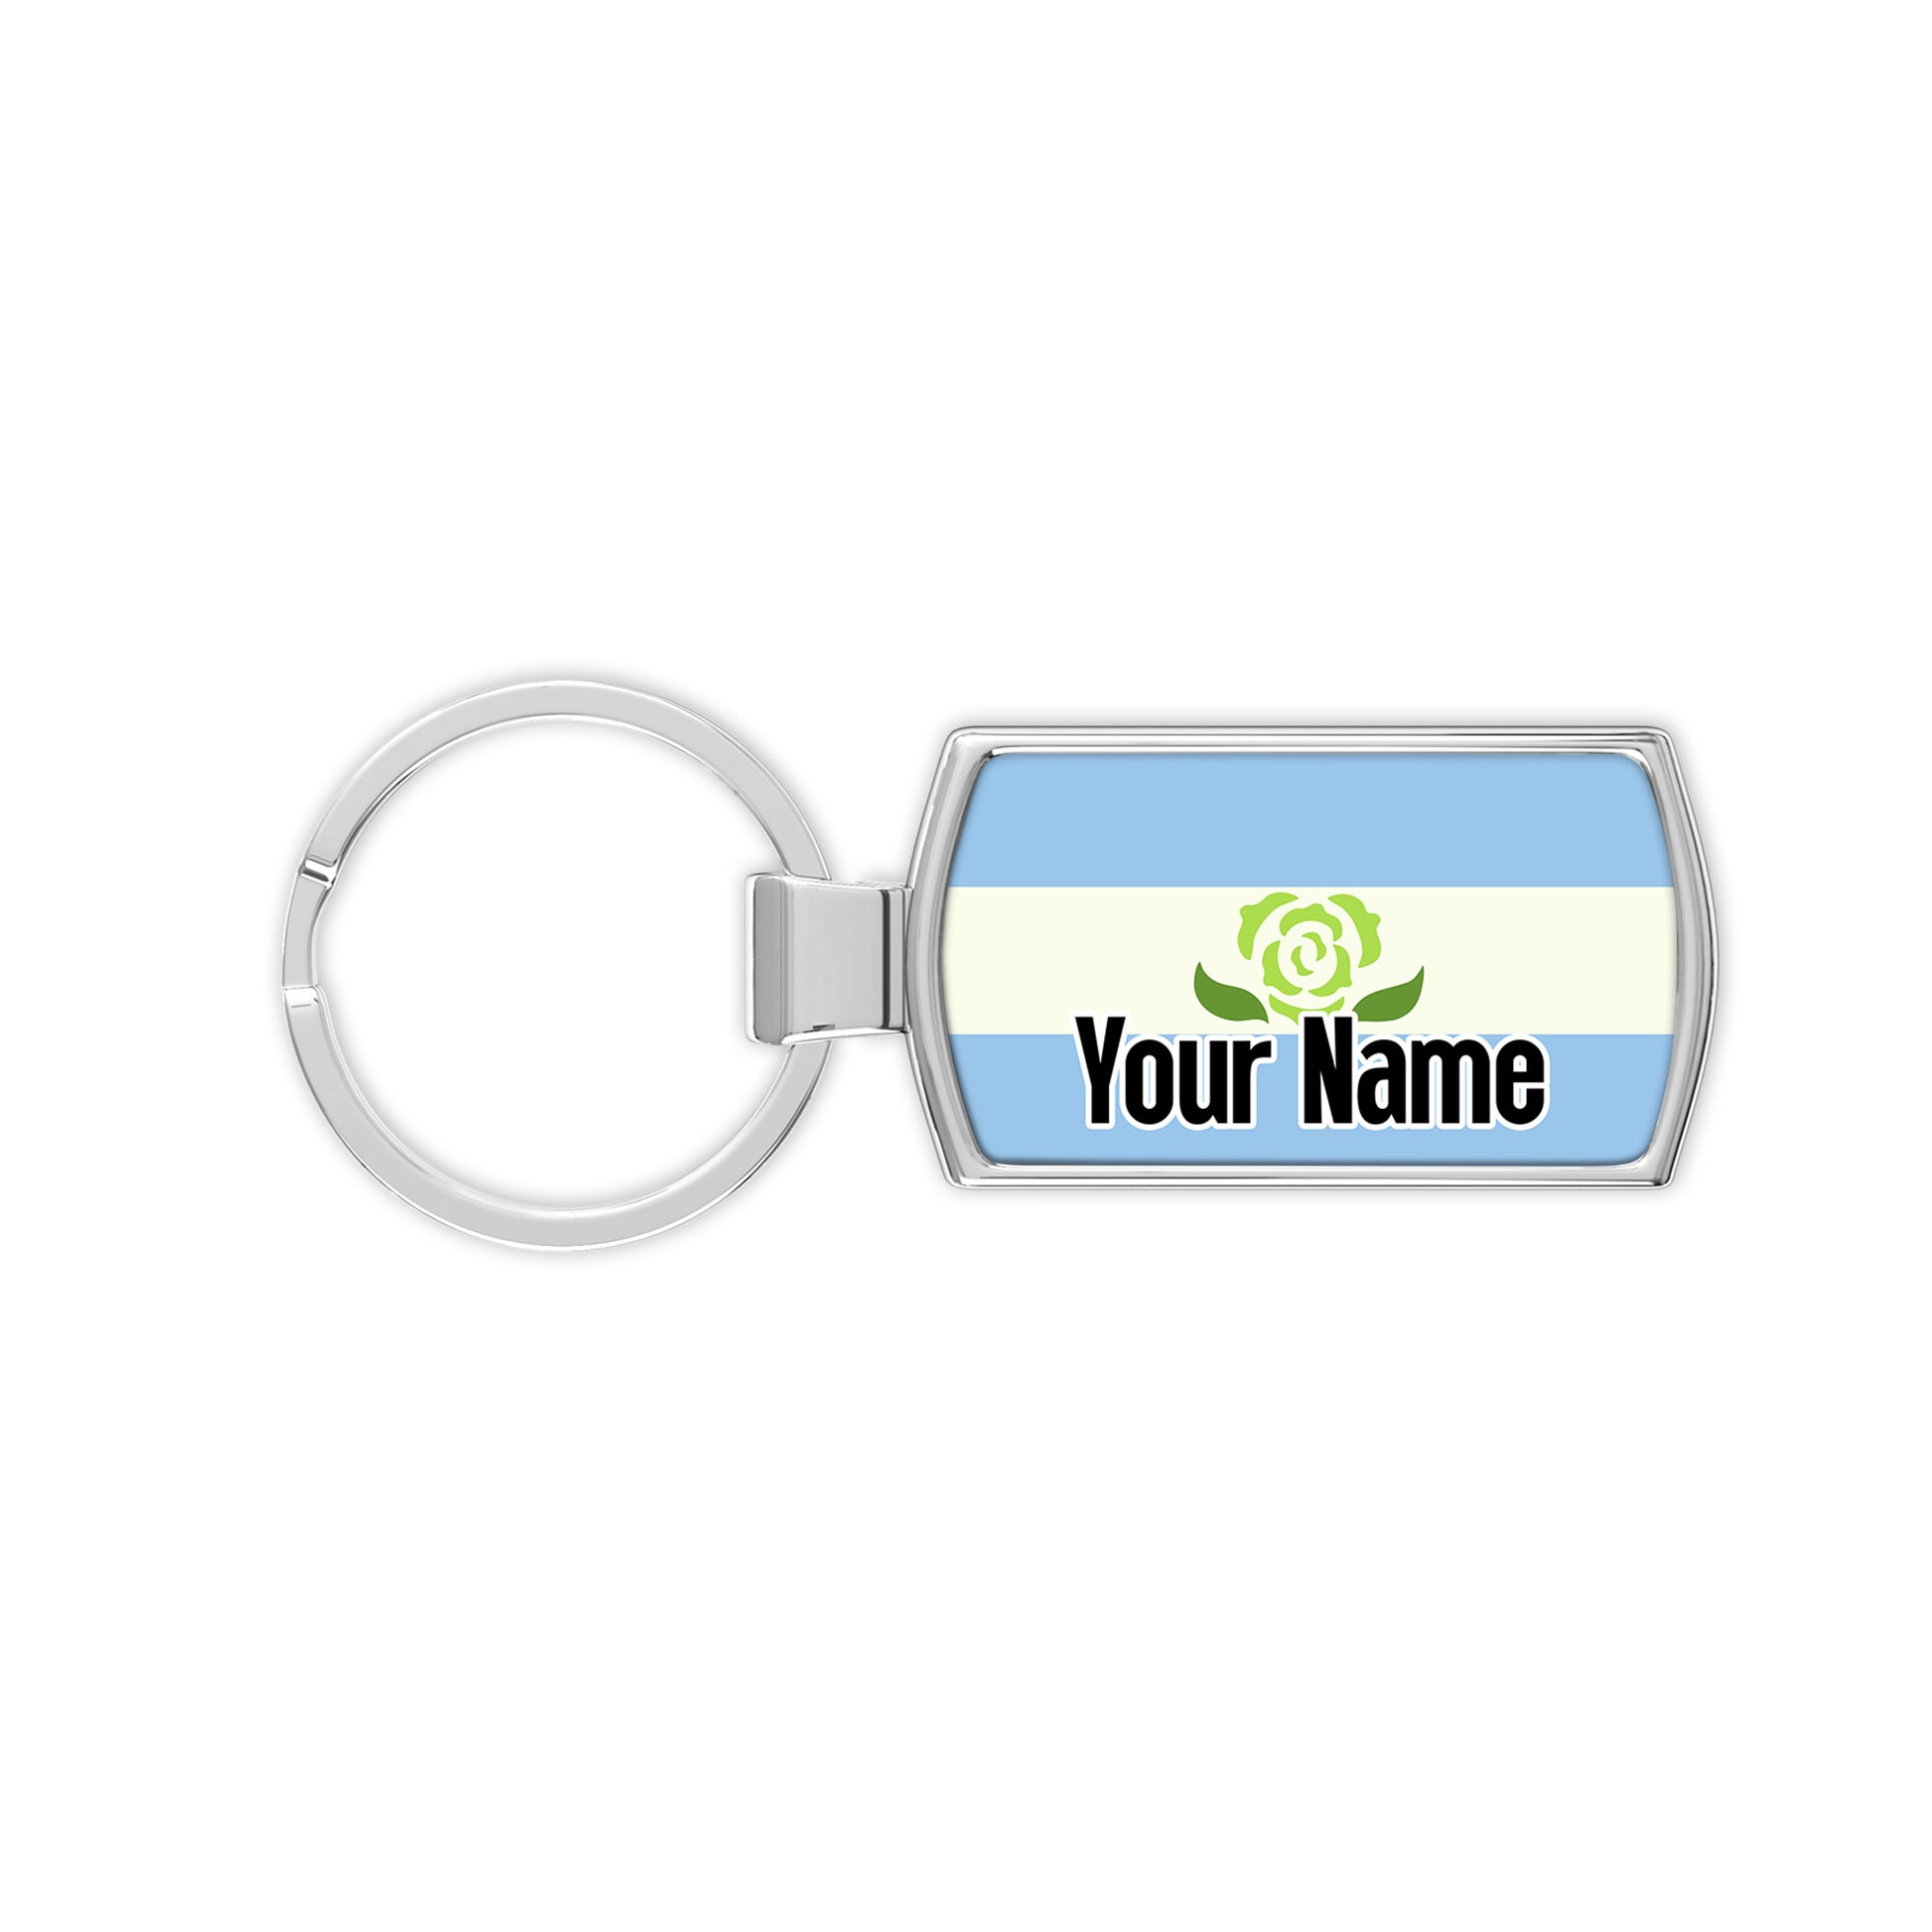 Achillean pride flag metal keyring personalised with your name